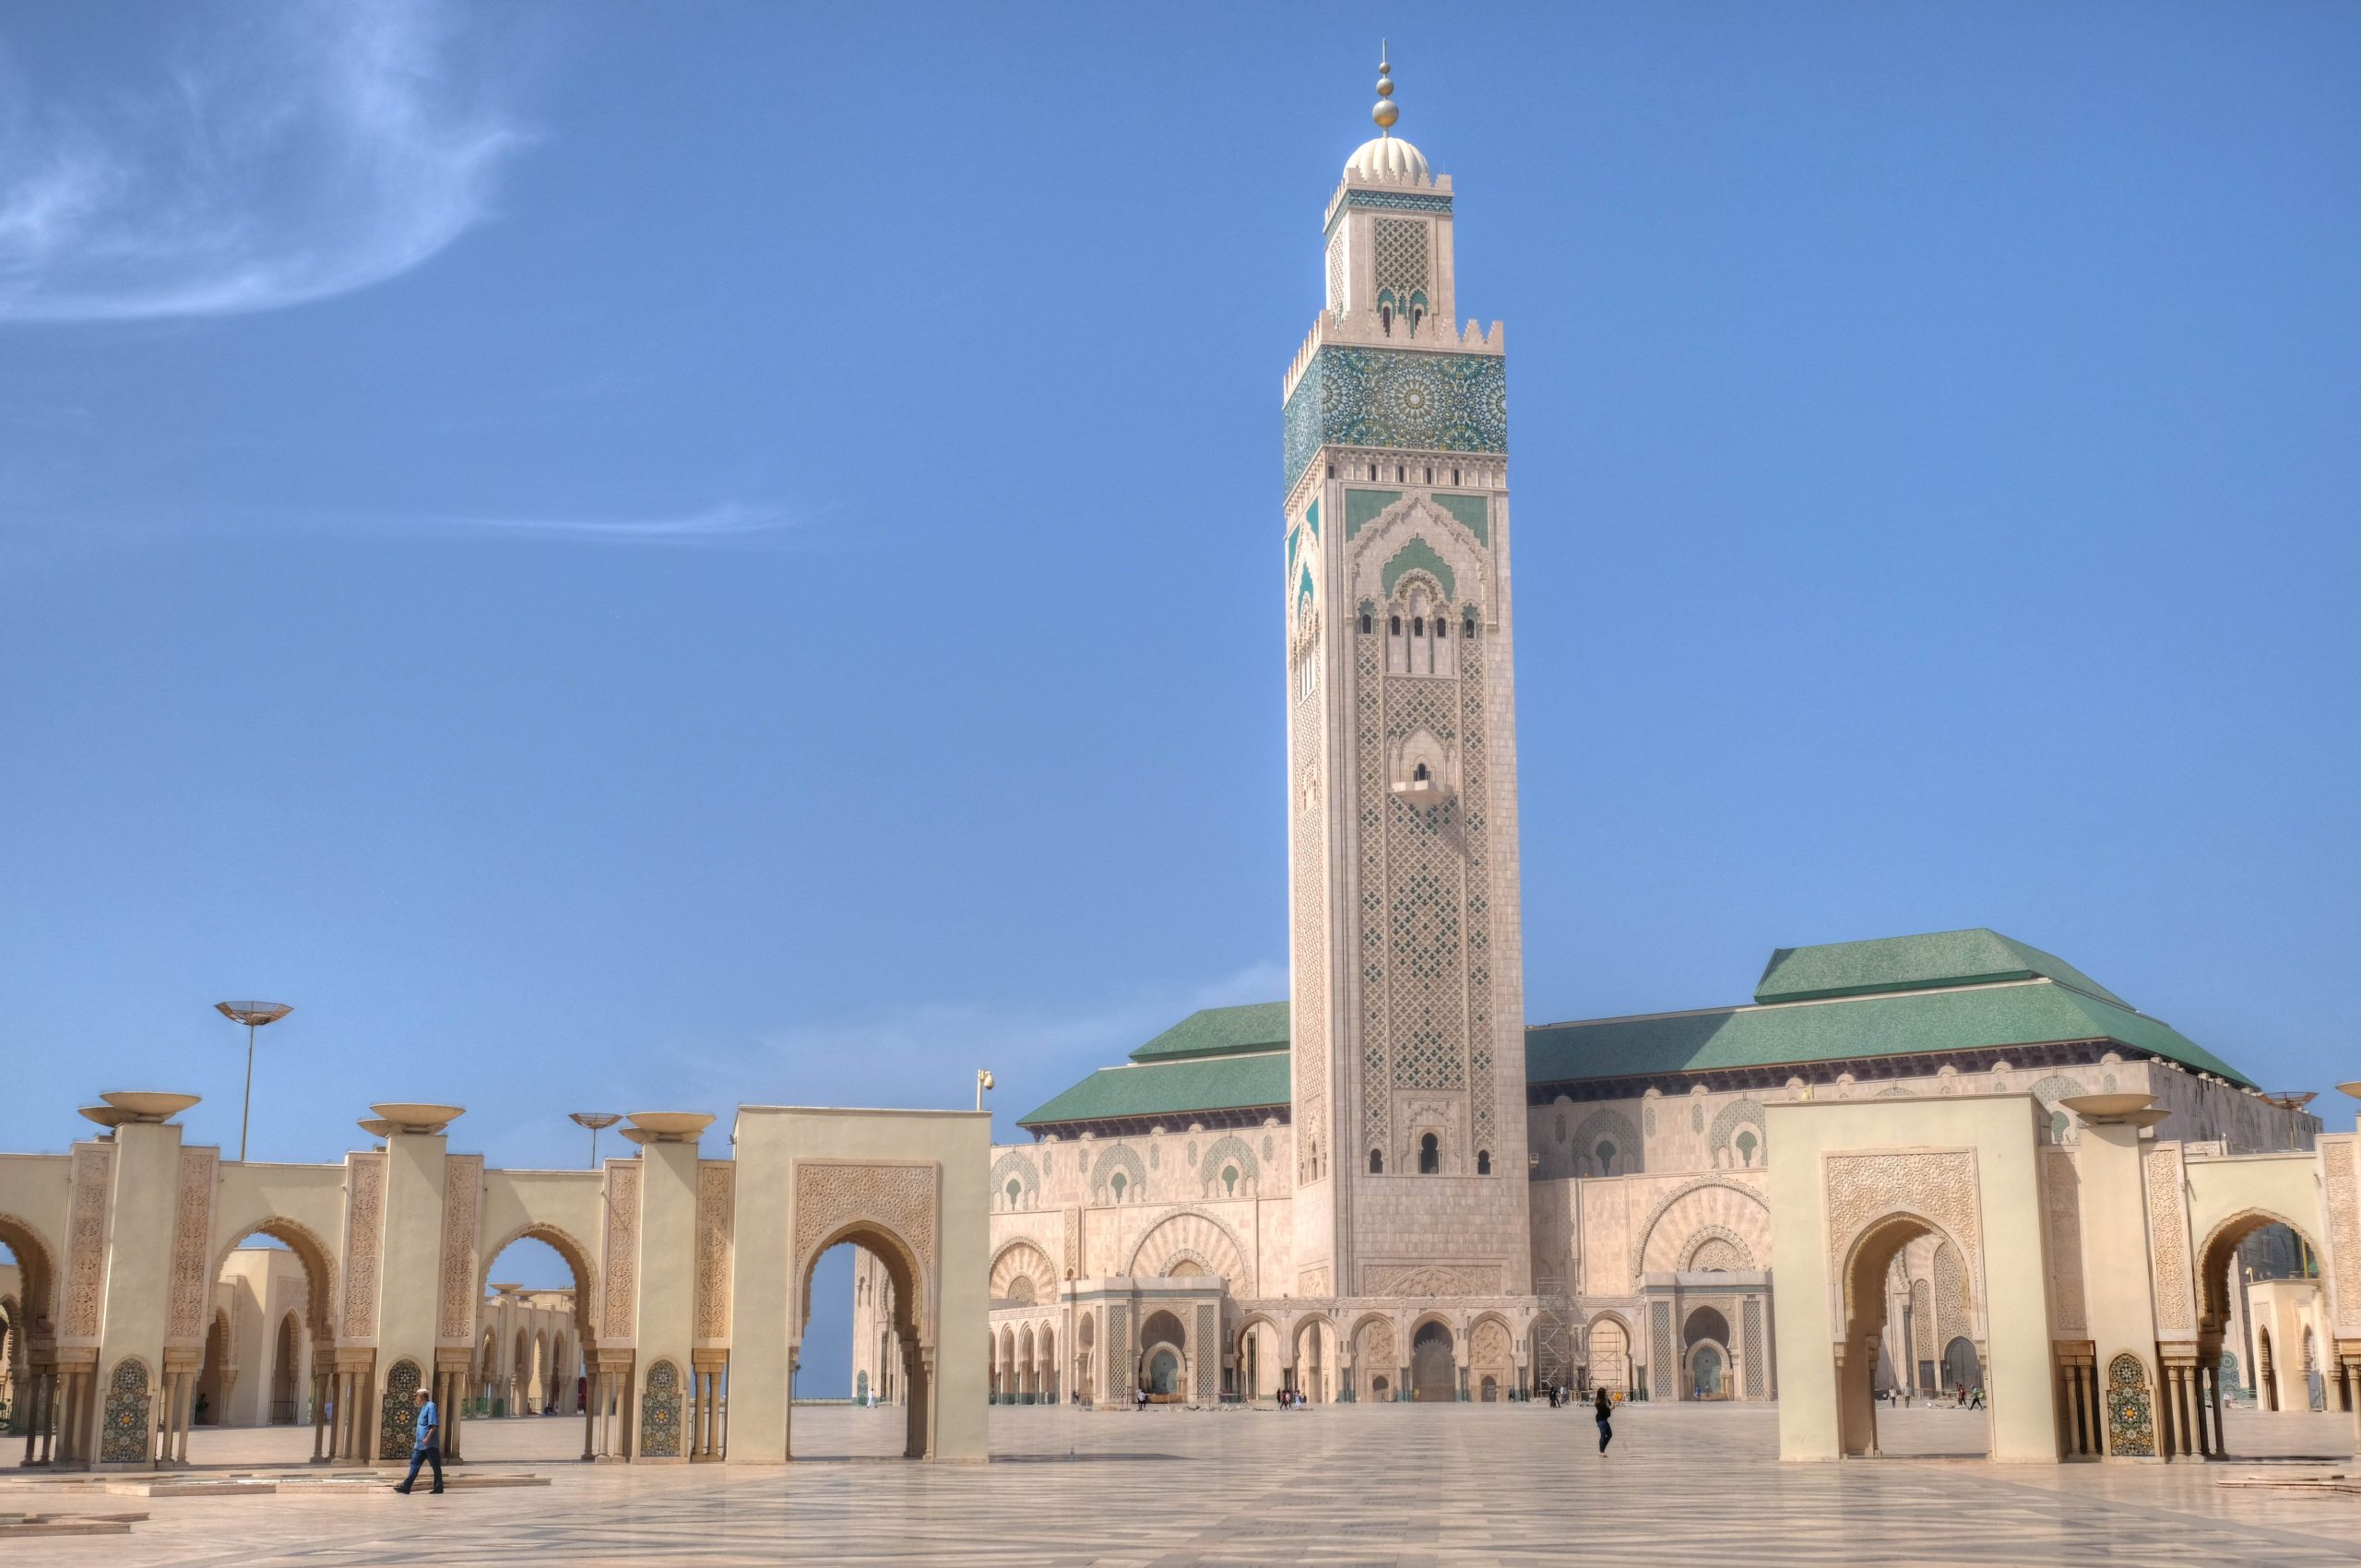 The Hassan II Mosque Casablanca: A Moroccan Architectural Marvel